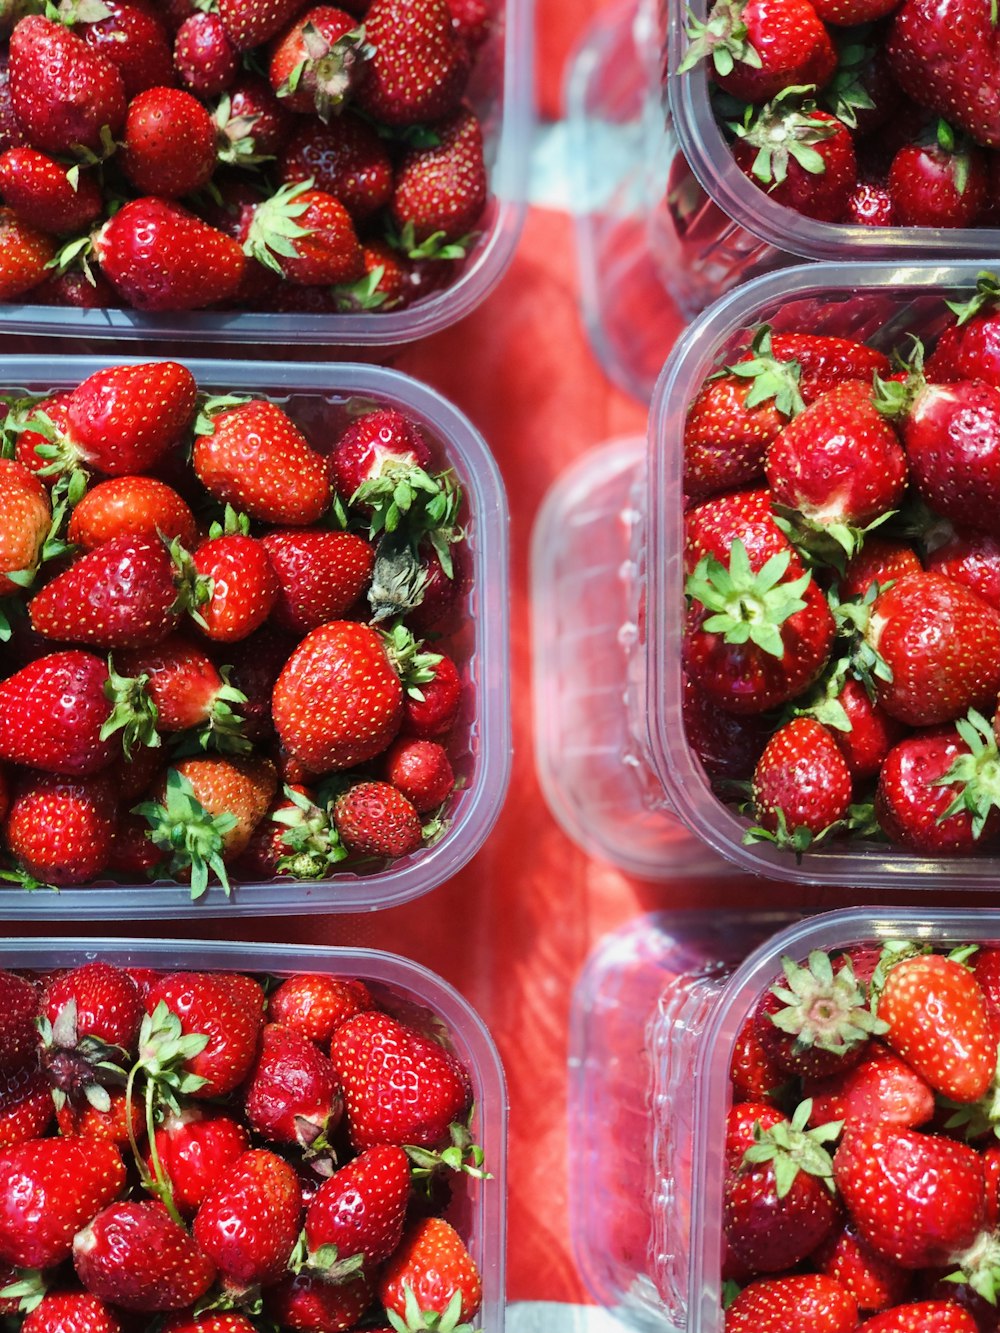 red strawberries in clear plastic container